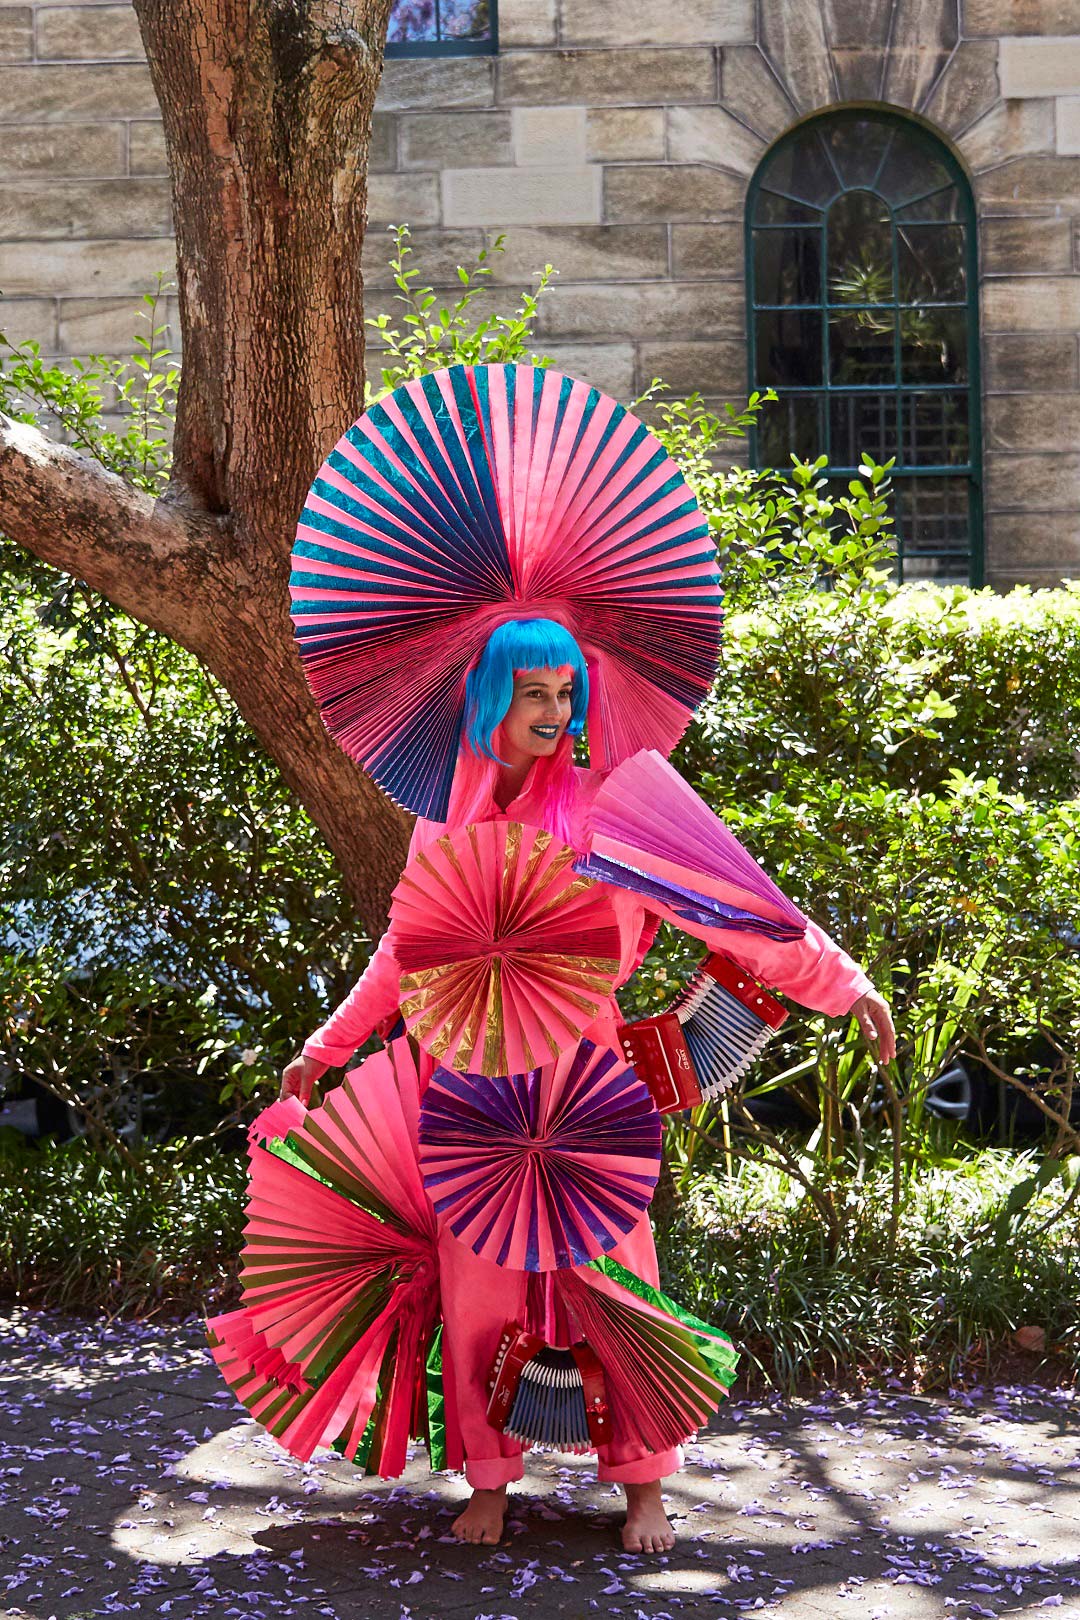 A performer in costume for the concertina dance Two Fold by Justene Williams.